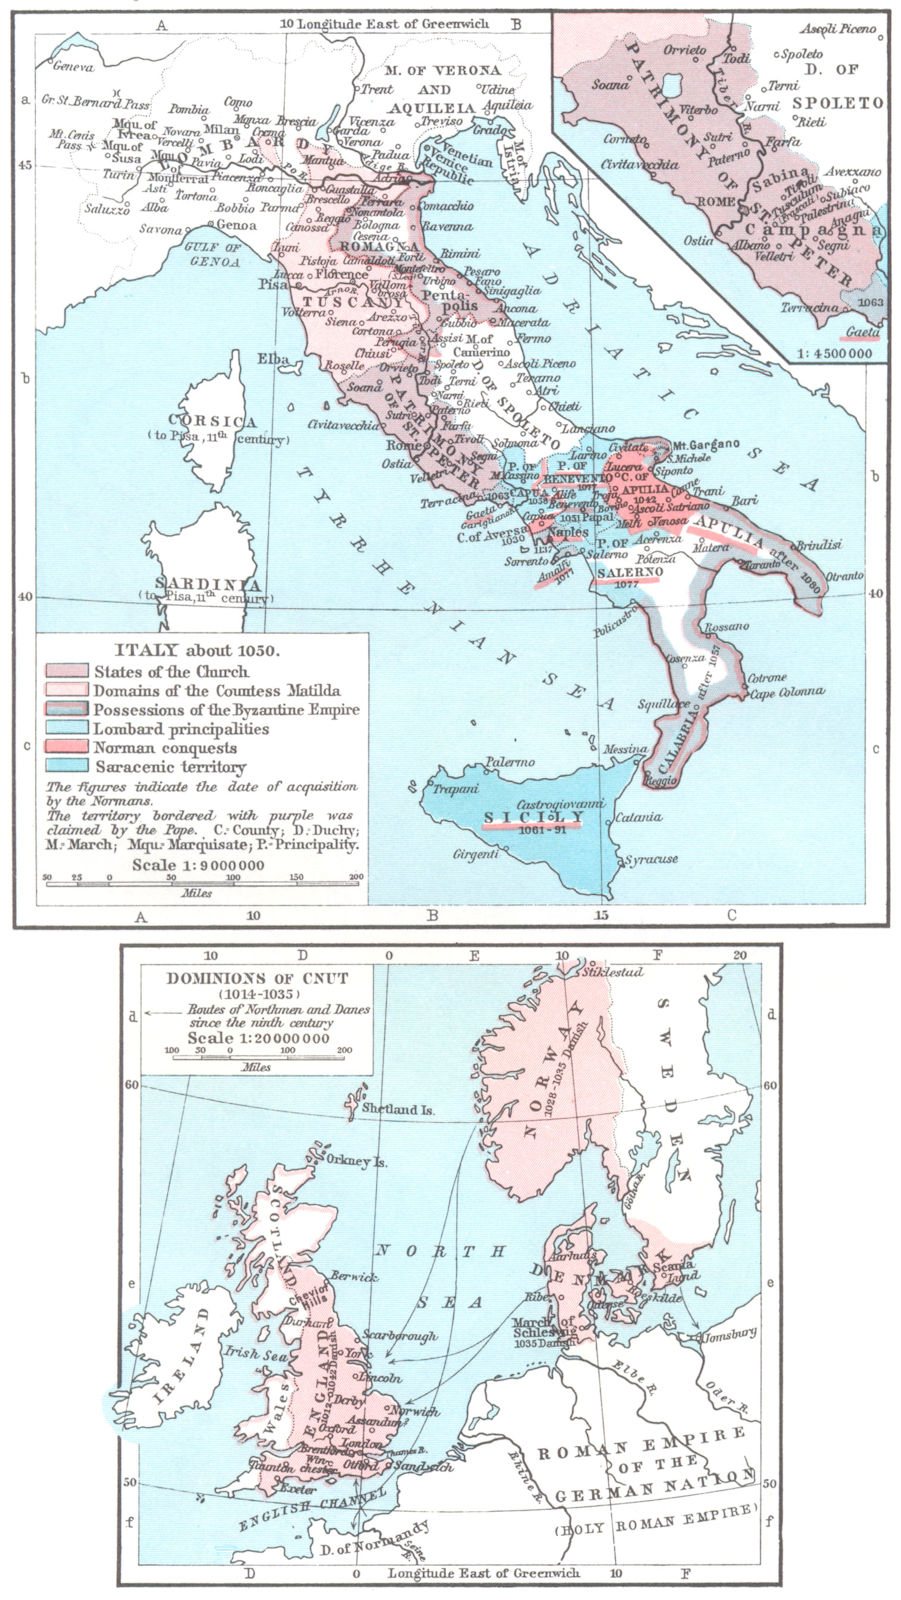 ITALY. c.1050; Insets. Patrimony of St Peter; Dominions Cnut 1014-35 1956 map